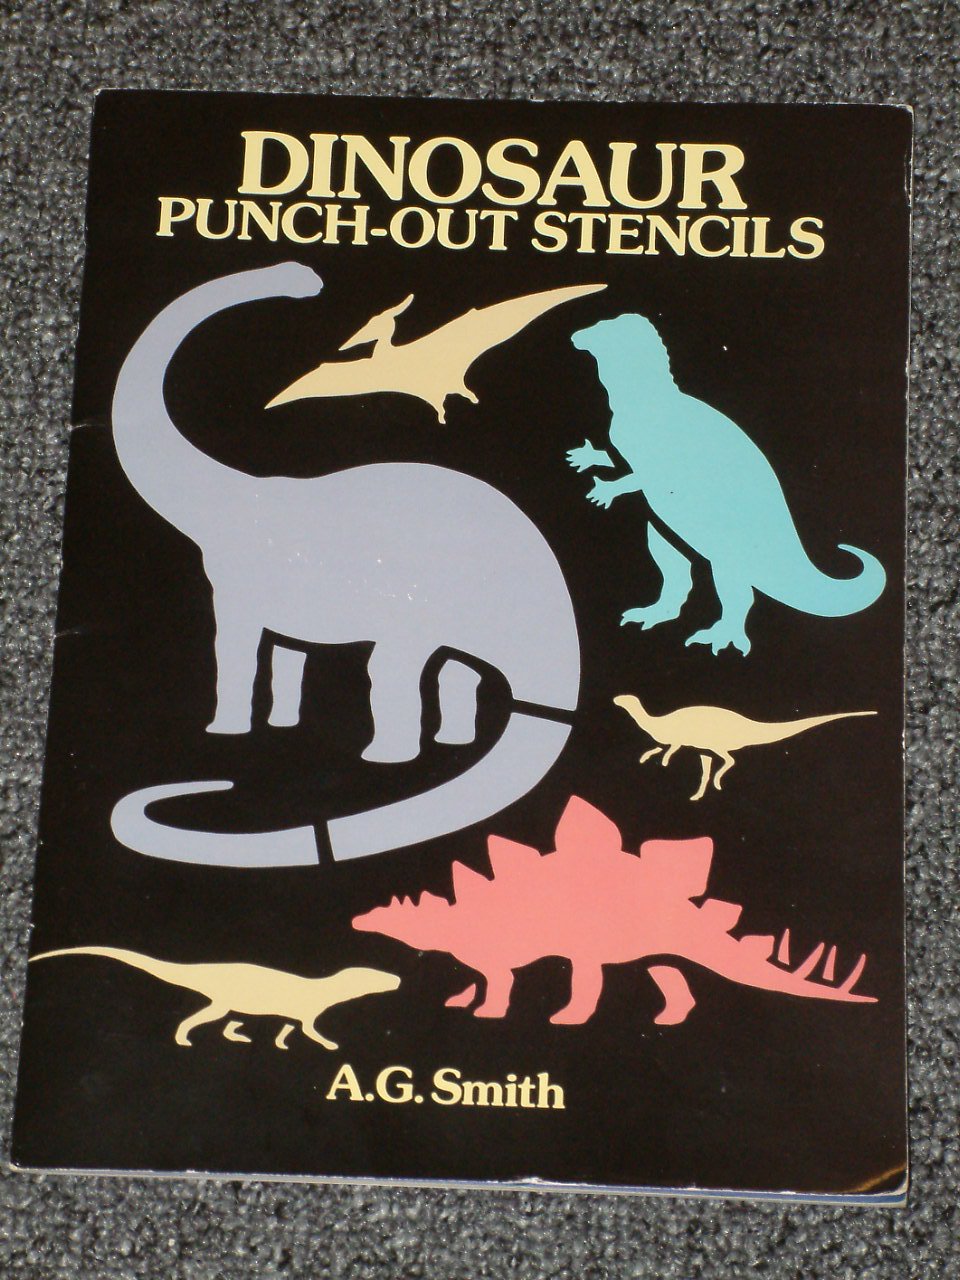 Dinosaur Punch Out Stencils A. G. Smith Dover books